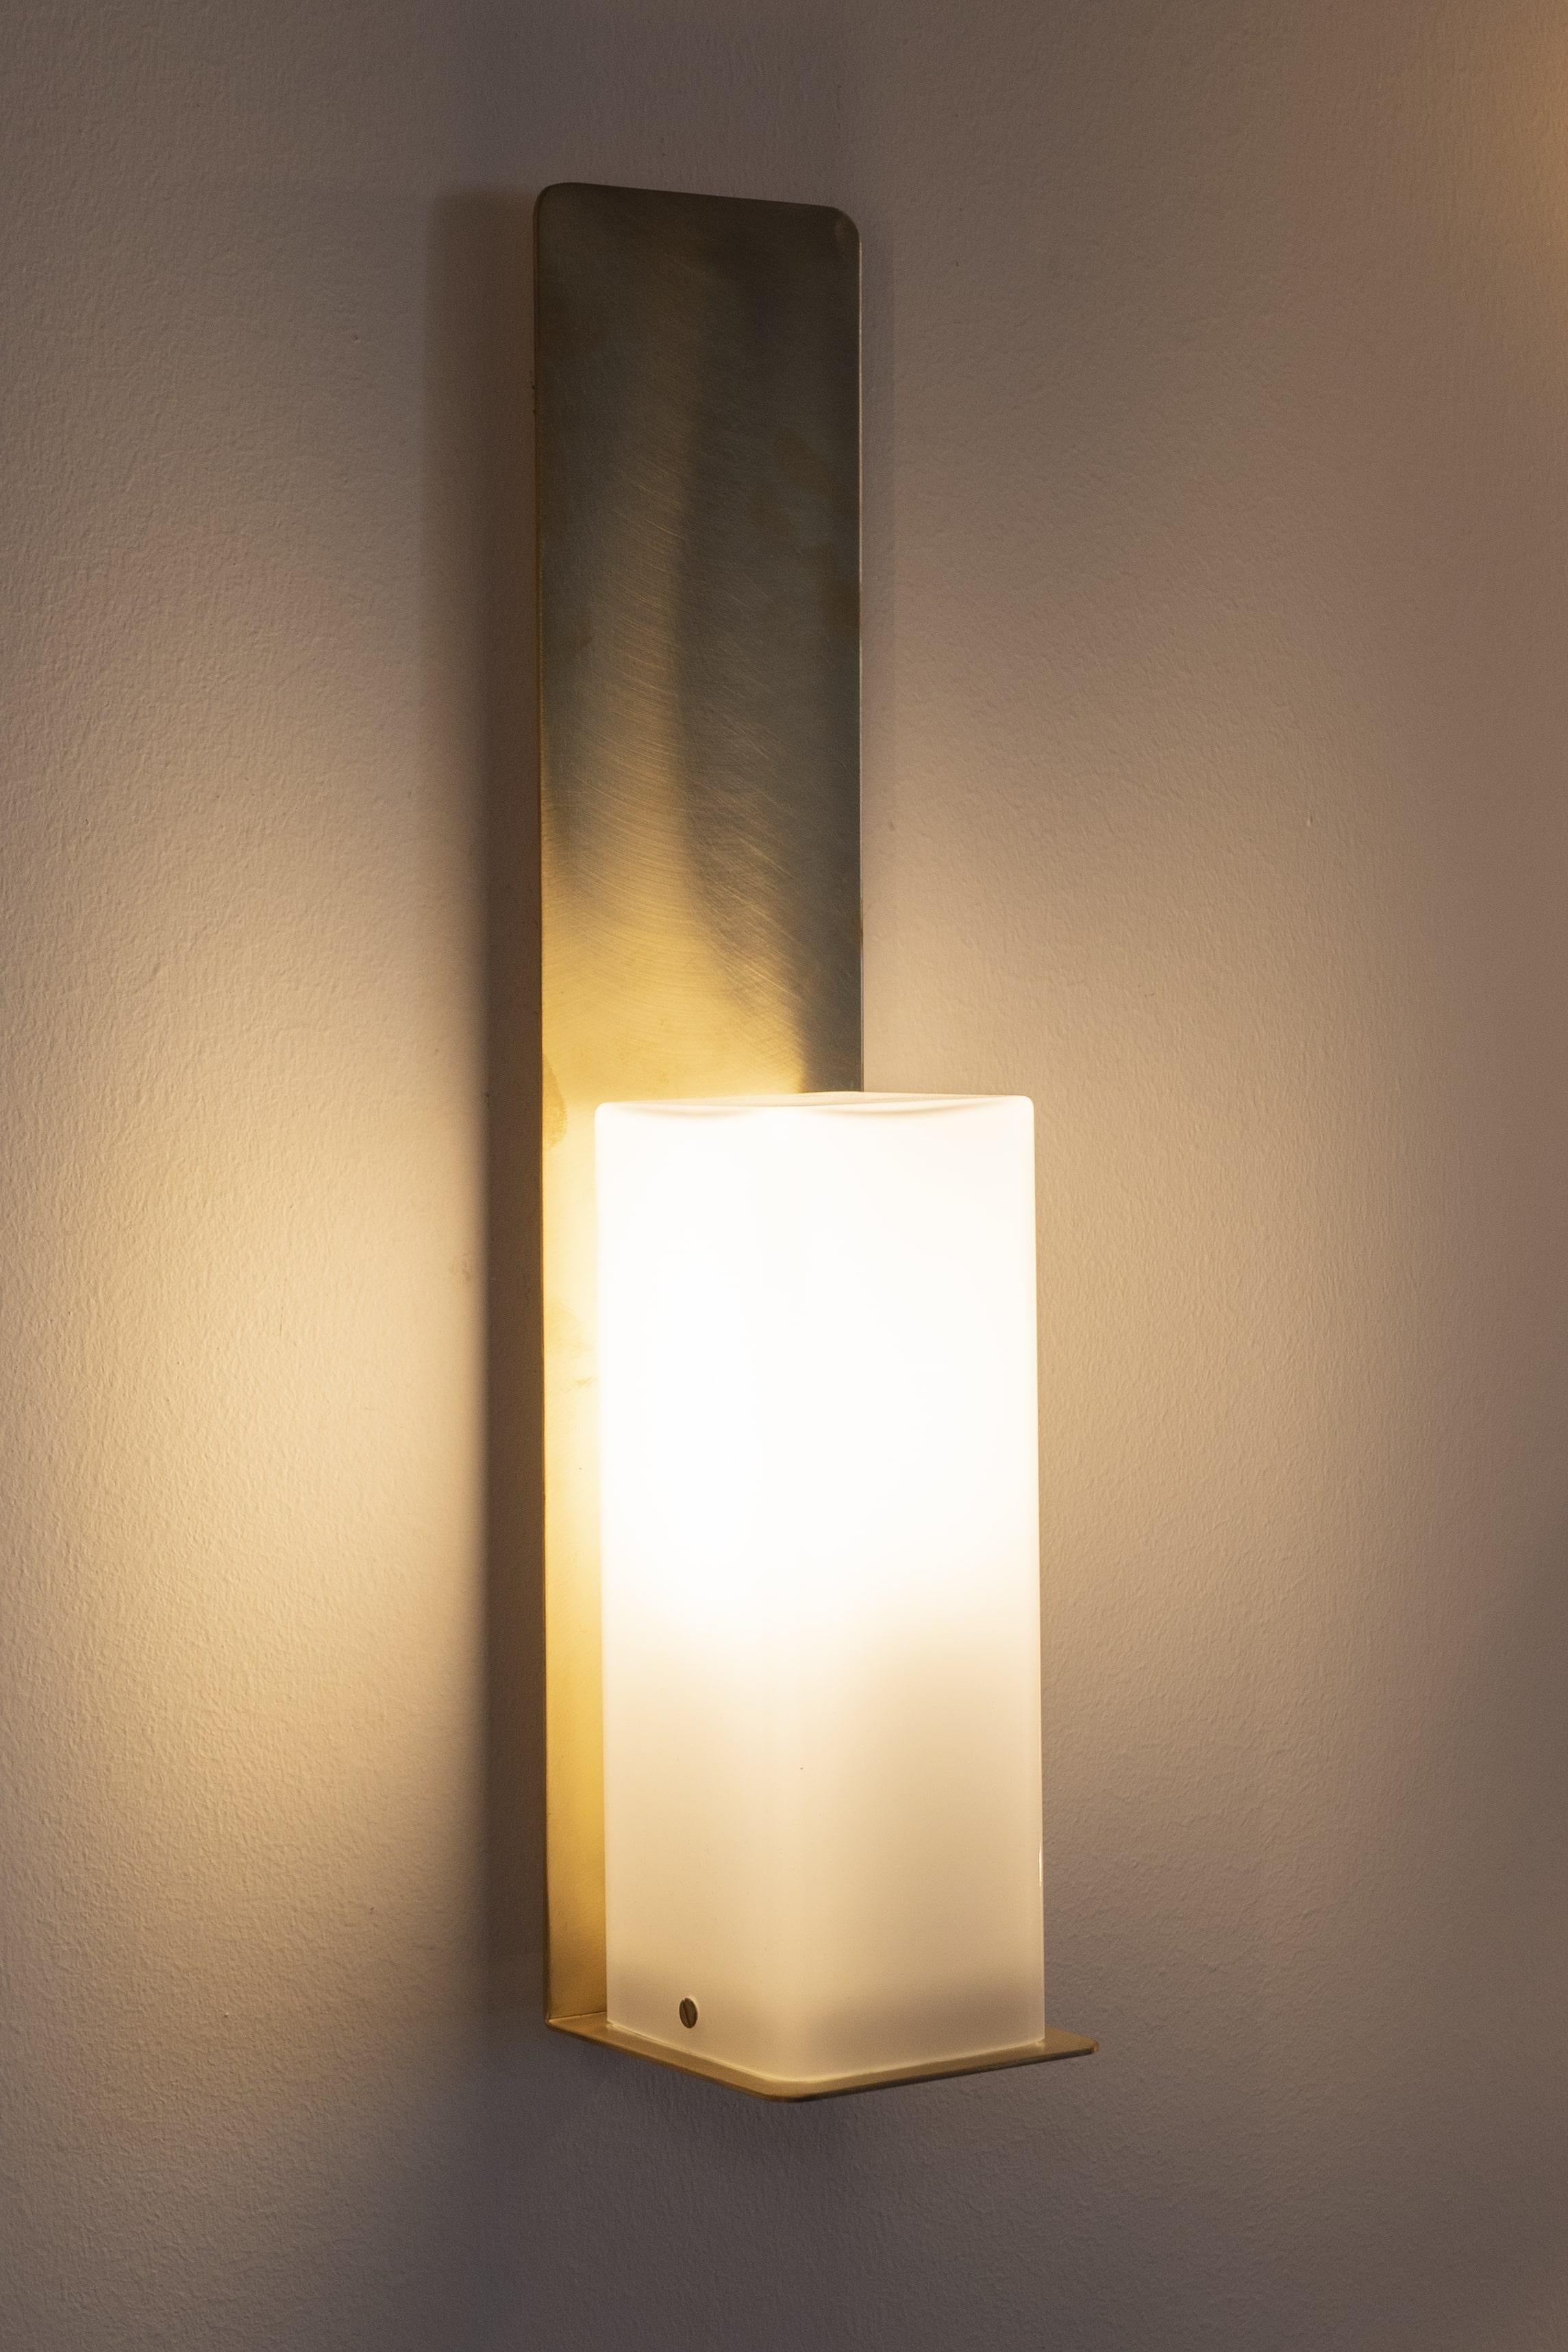 Massives Messing Contemporary-Modern Wall Light Handcrafted in Italy im Angebot 2